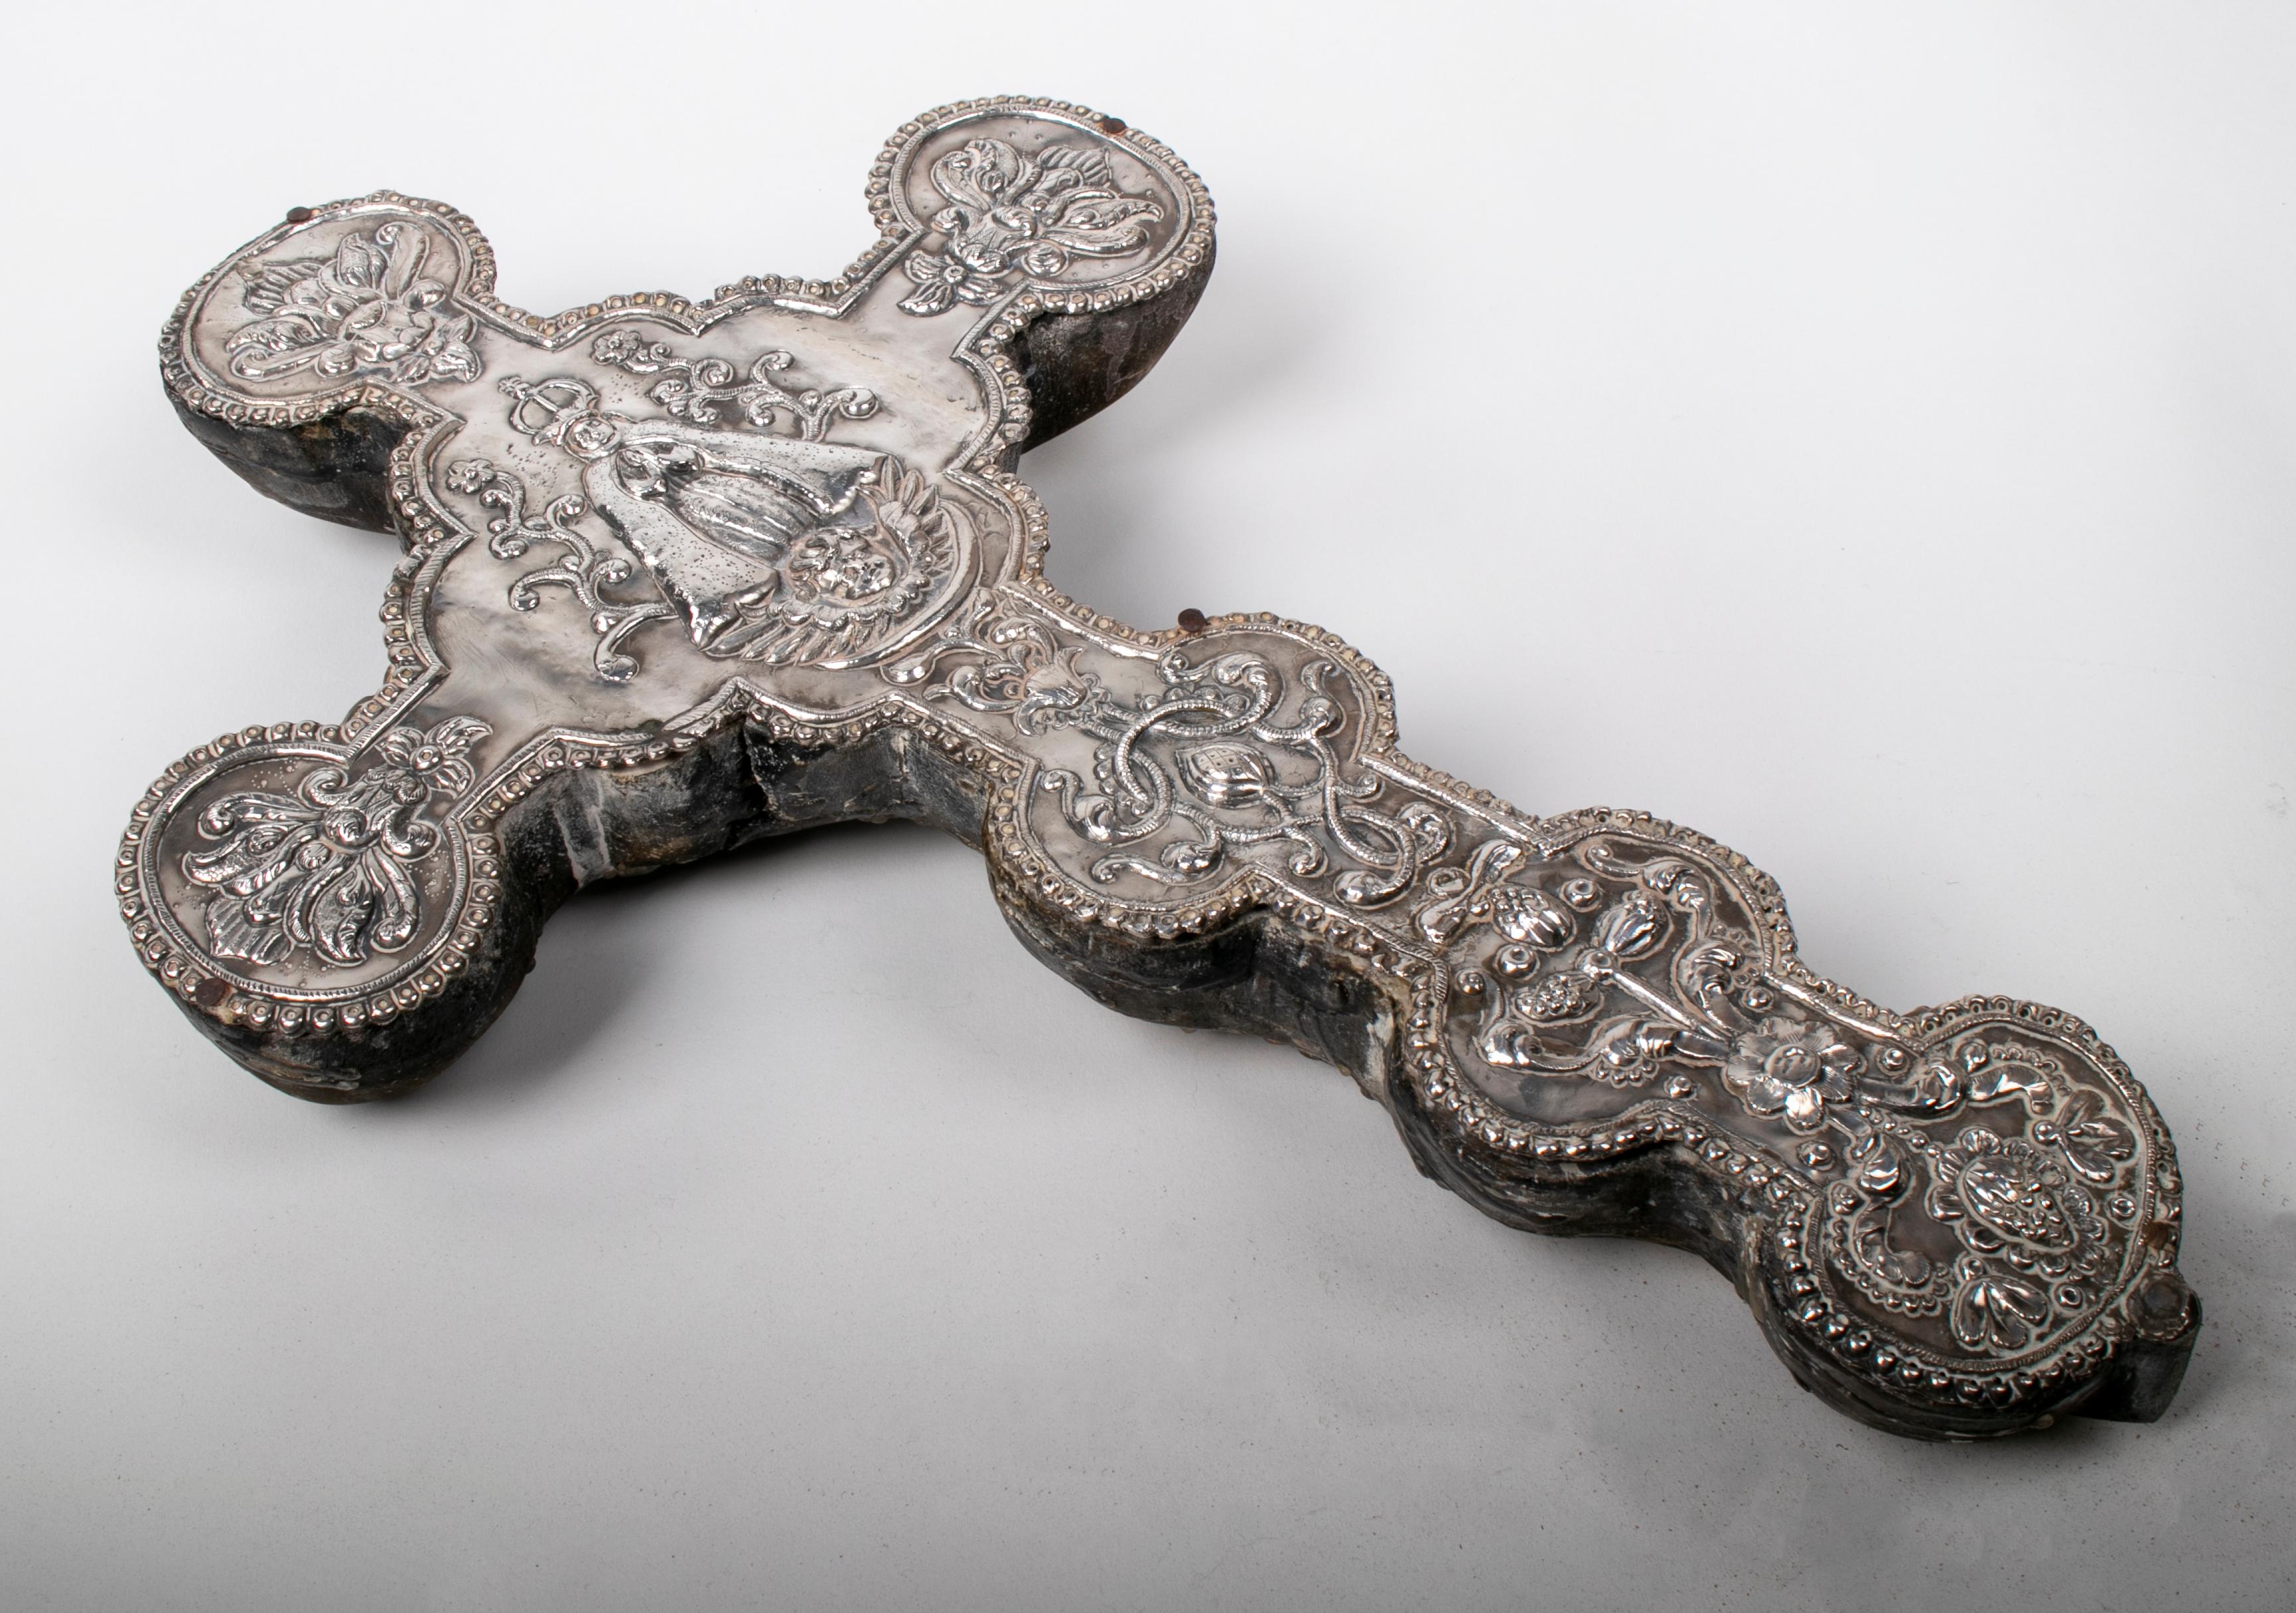 Late 18th-early 19th century Peruvian silver cross on wood.